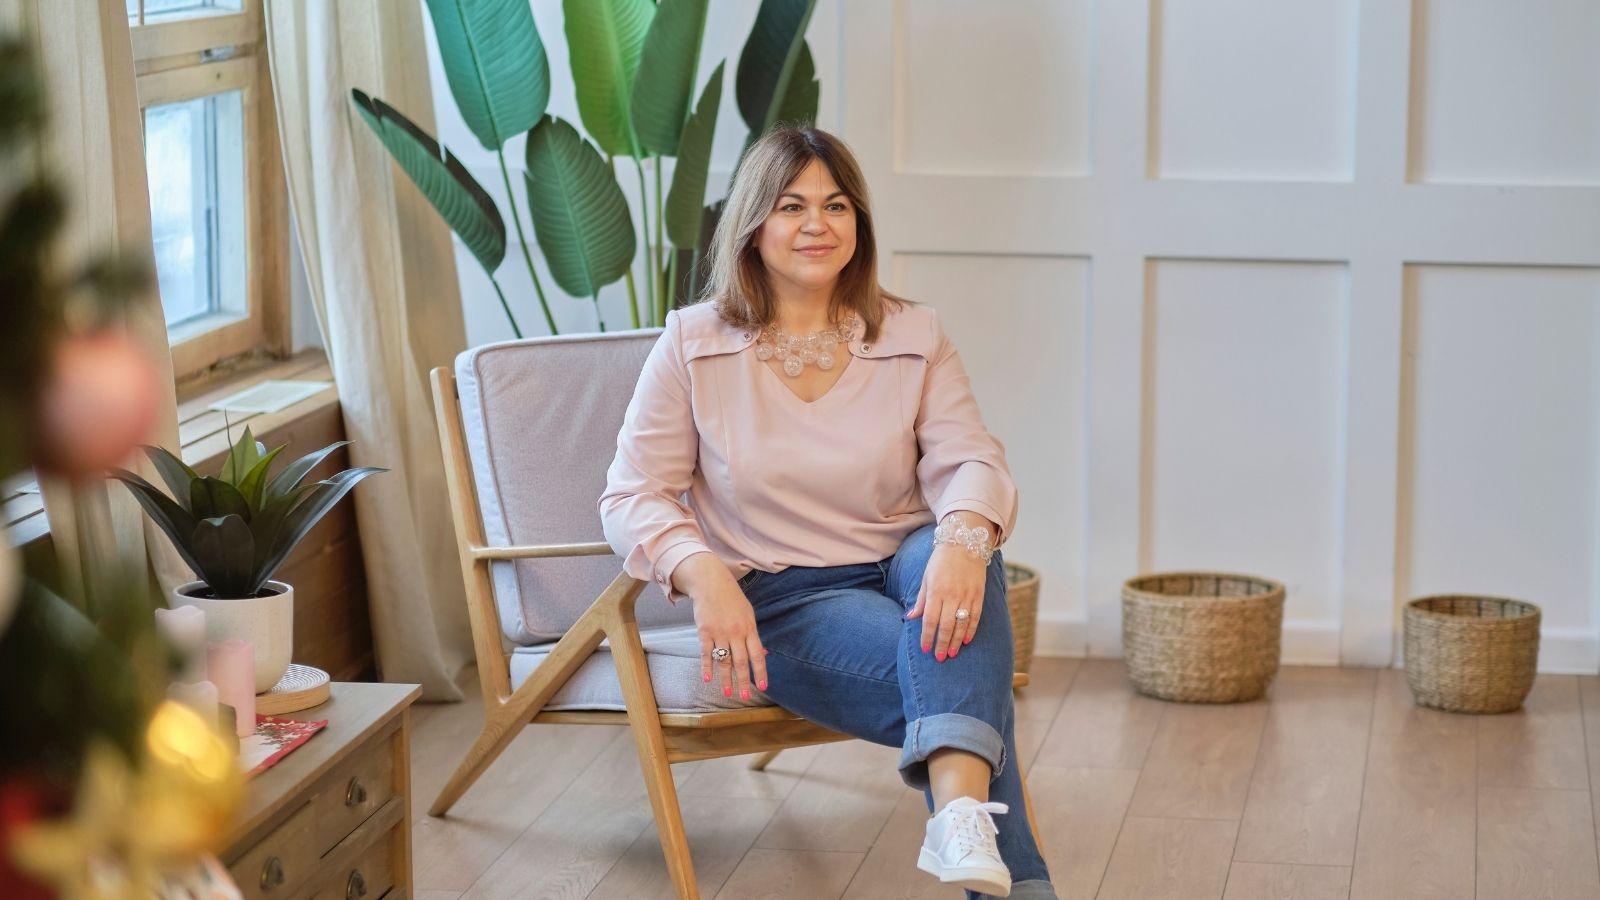 image of a perimenopausal woman sitting on a chair surrounded by plants